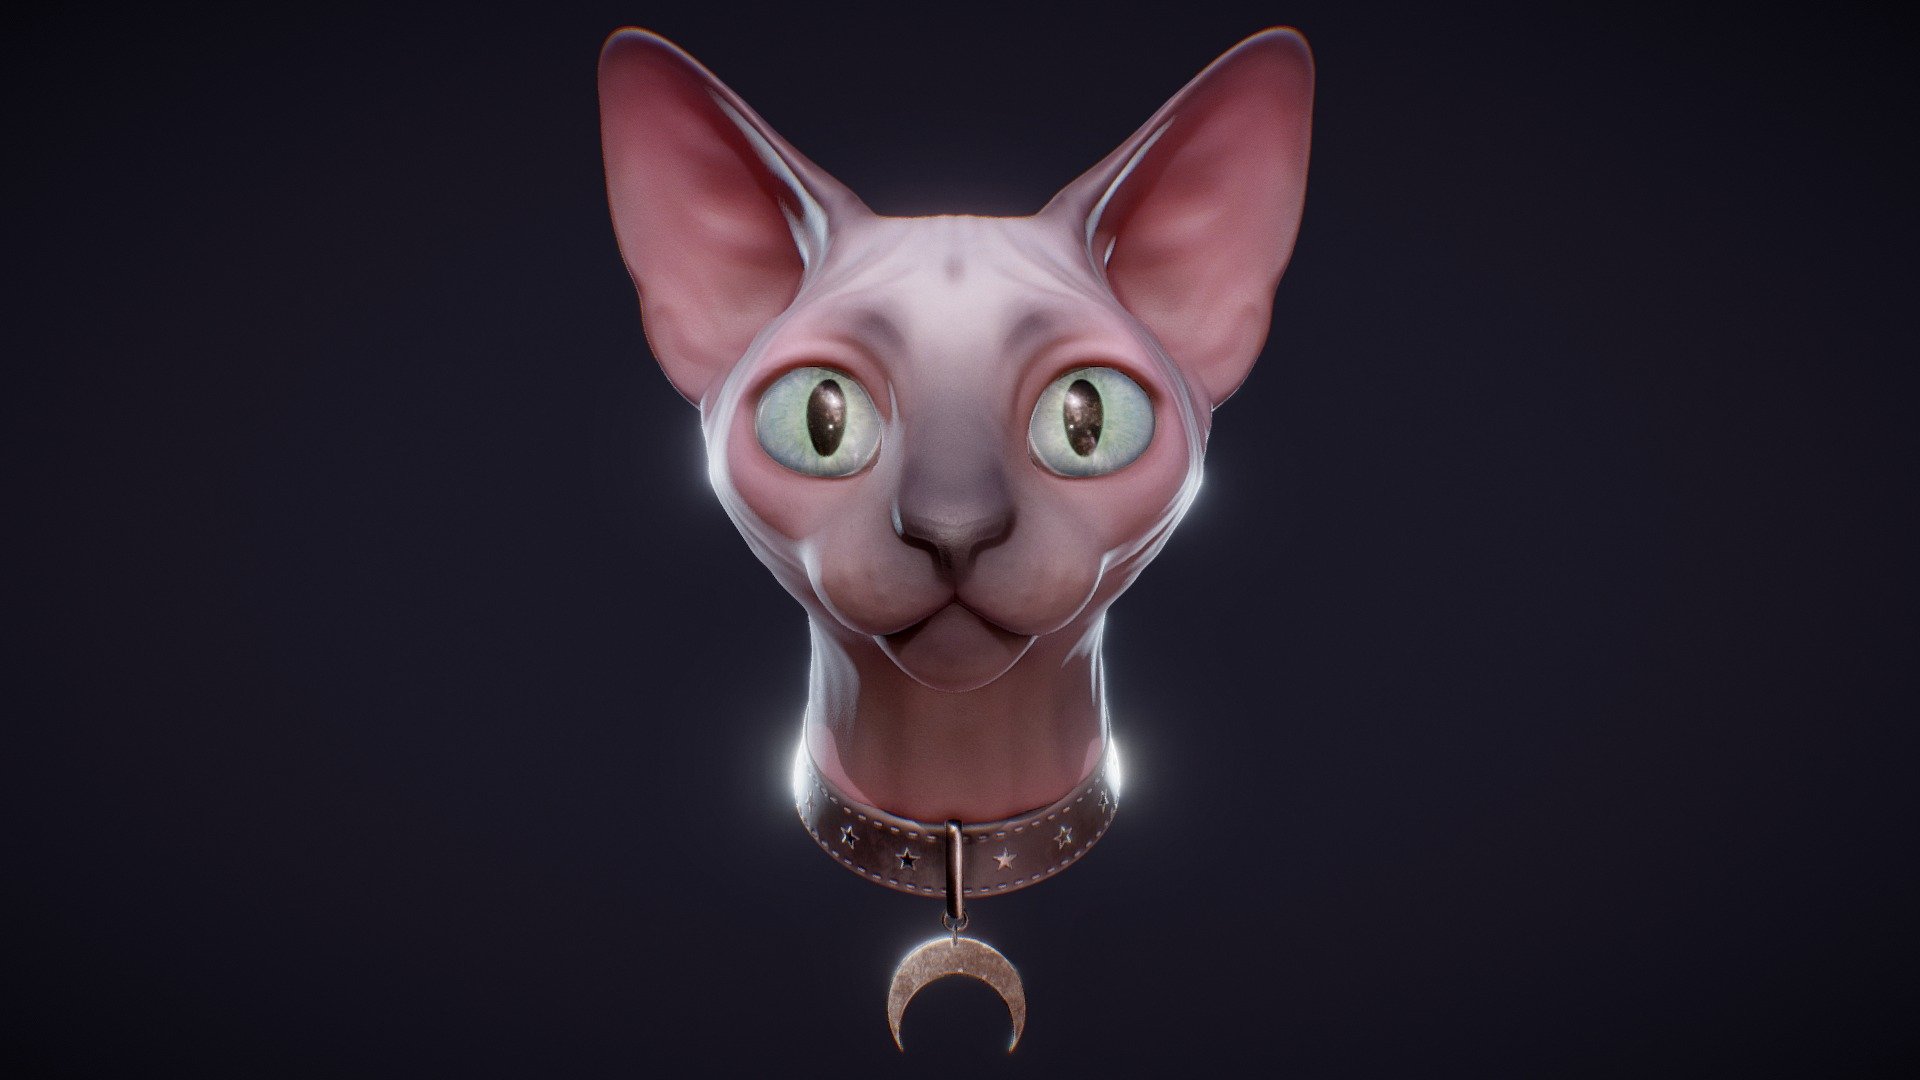 Spooky Sphynx kitty!
A fun little project I've been working over the past few days in order to learn a bit more about Z Brush and Substance painter 3d model